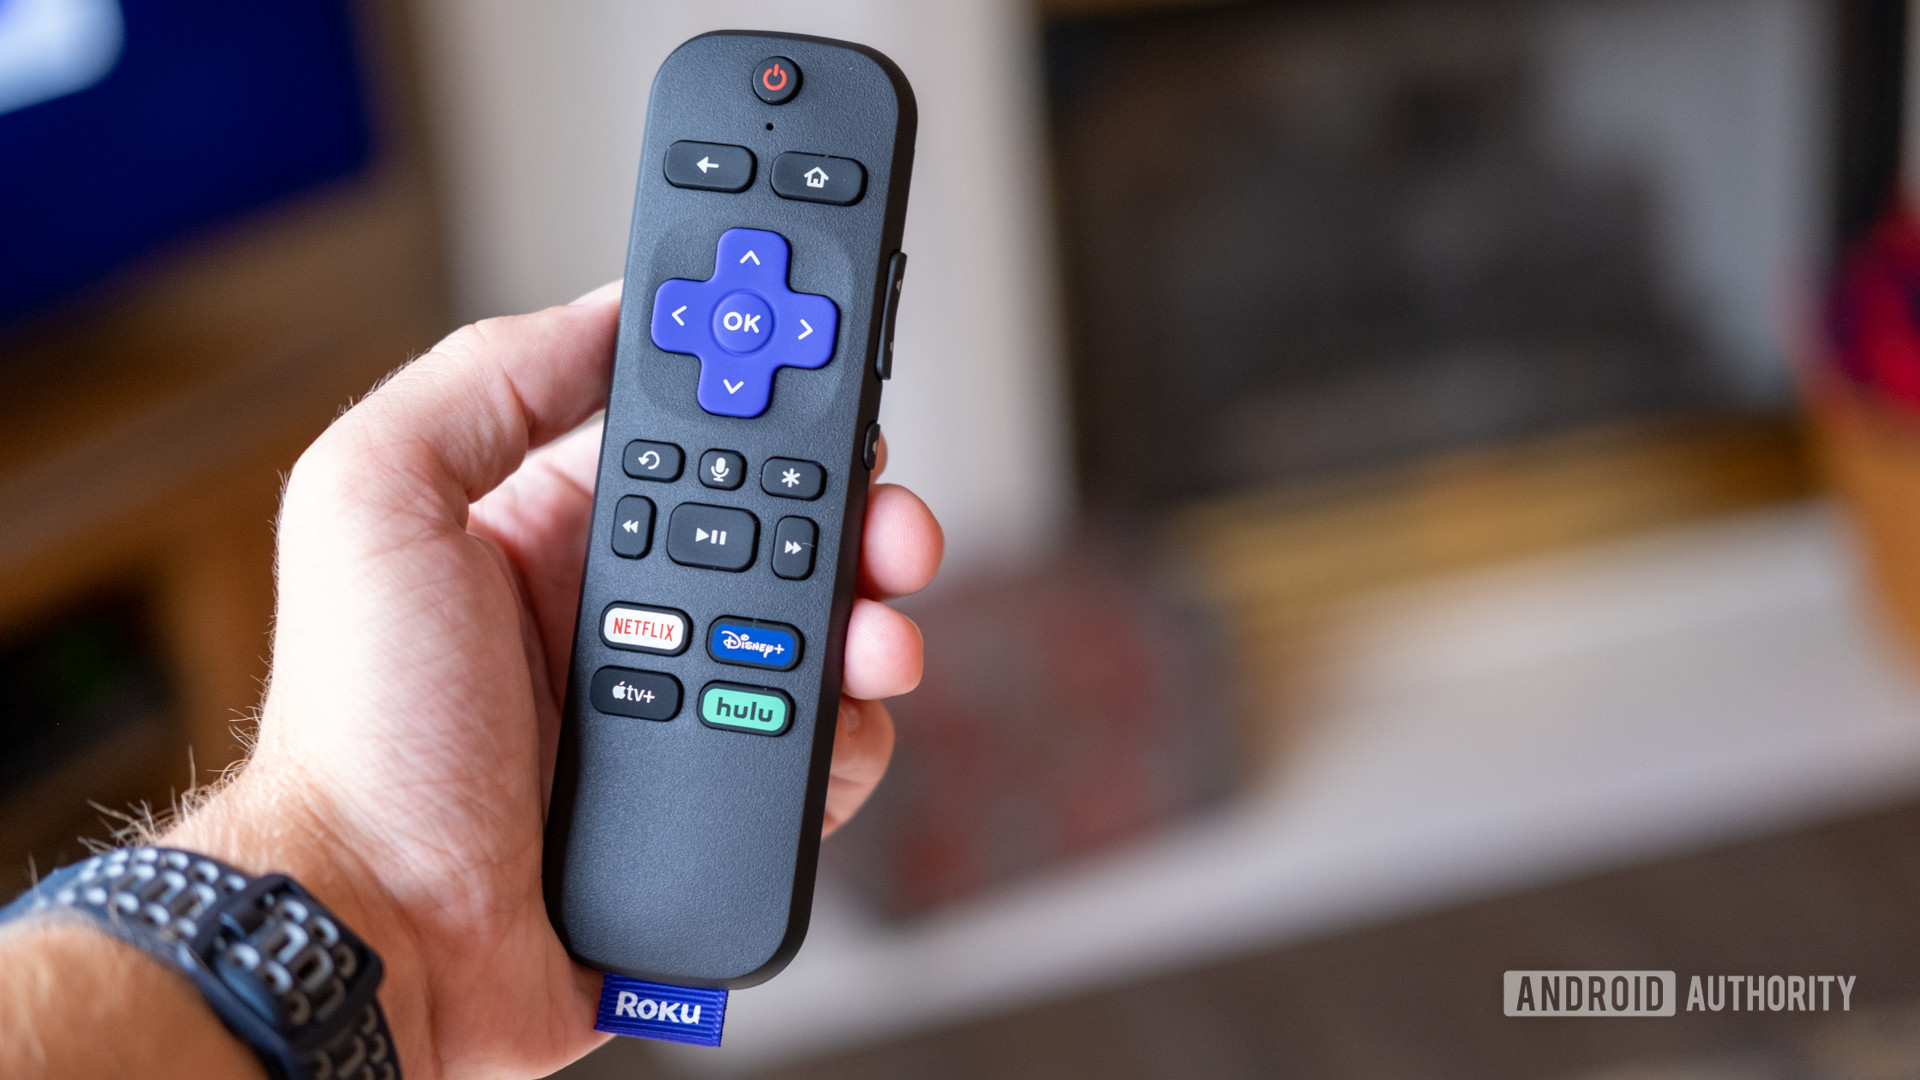 A Roku remote in hand